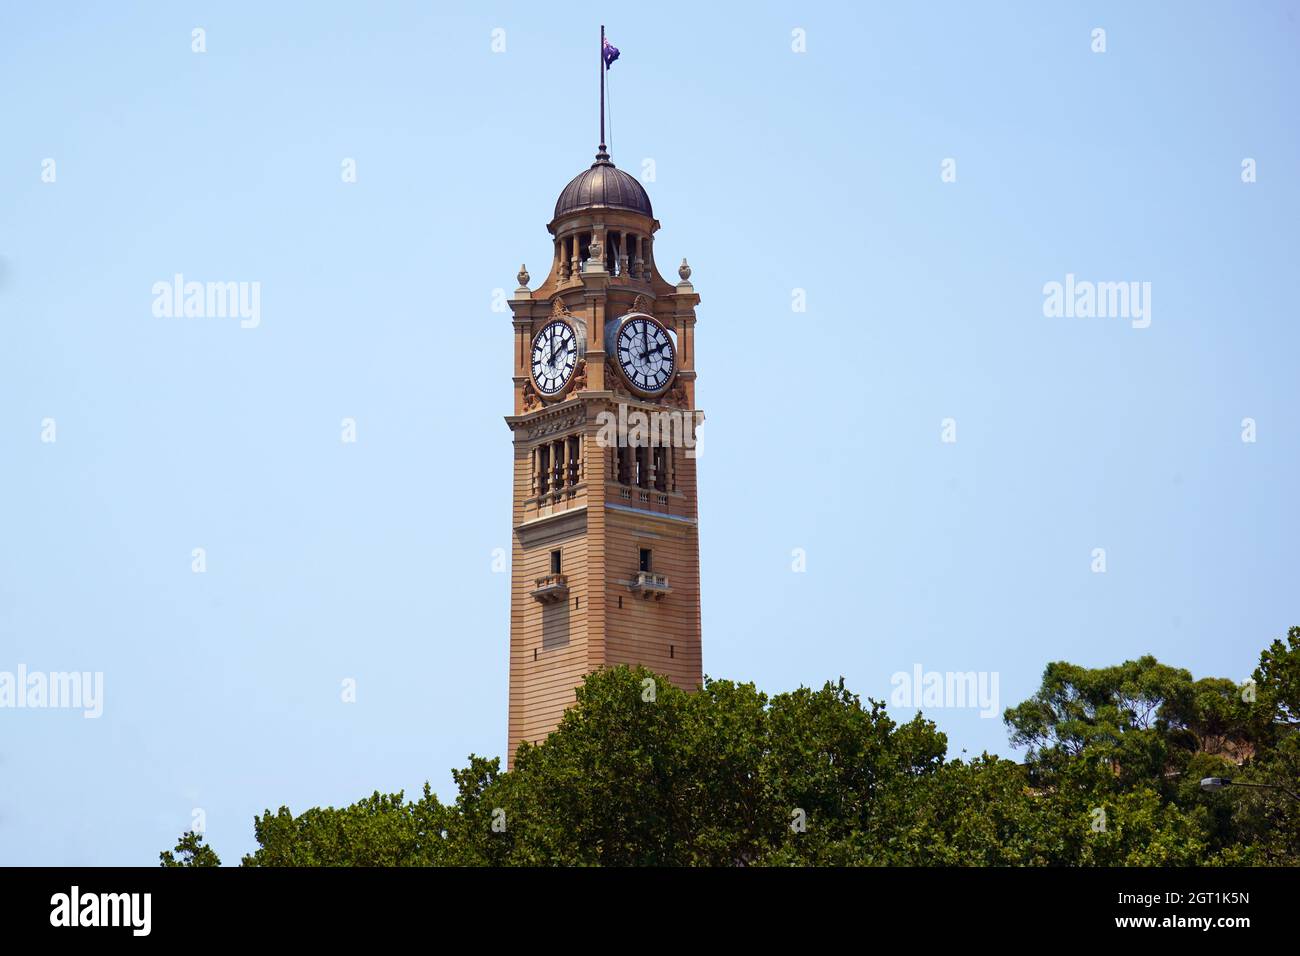 Central Station Clock Tower in Sydney. Stockfoto